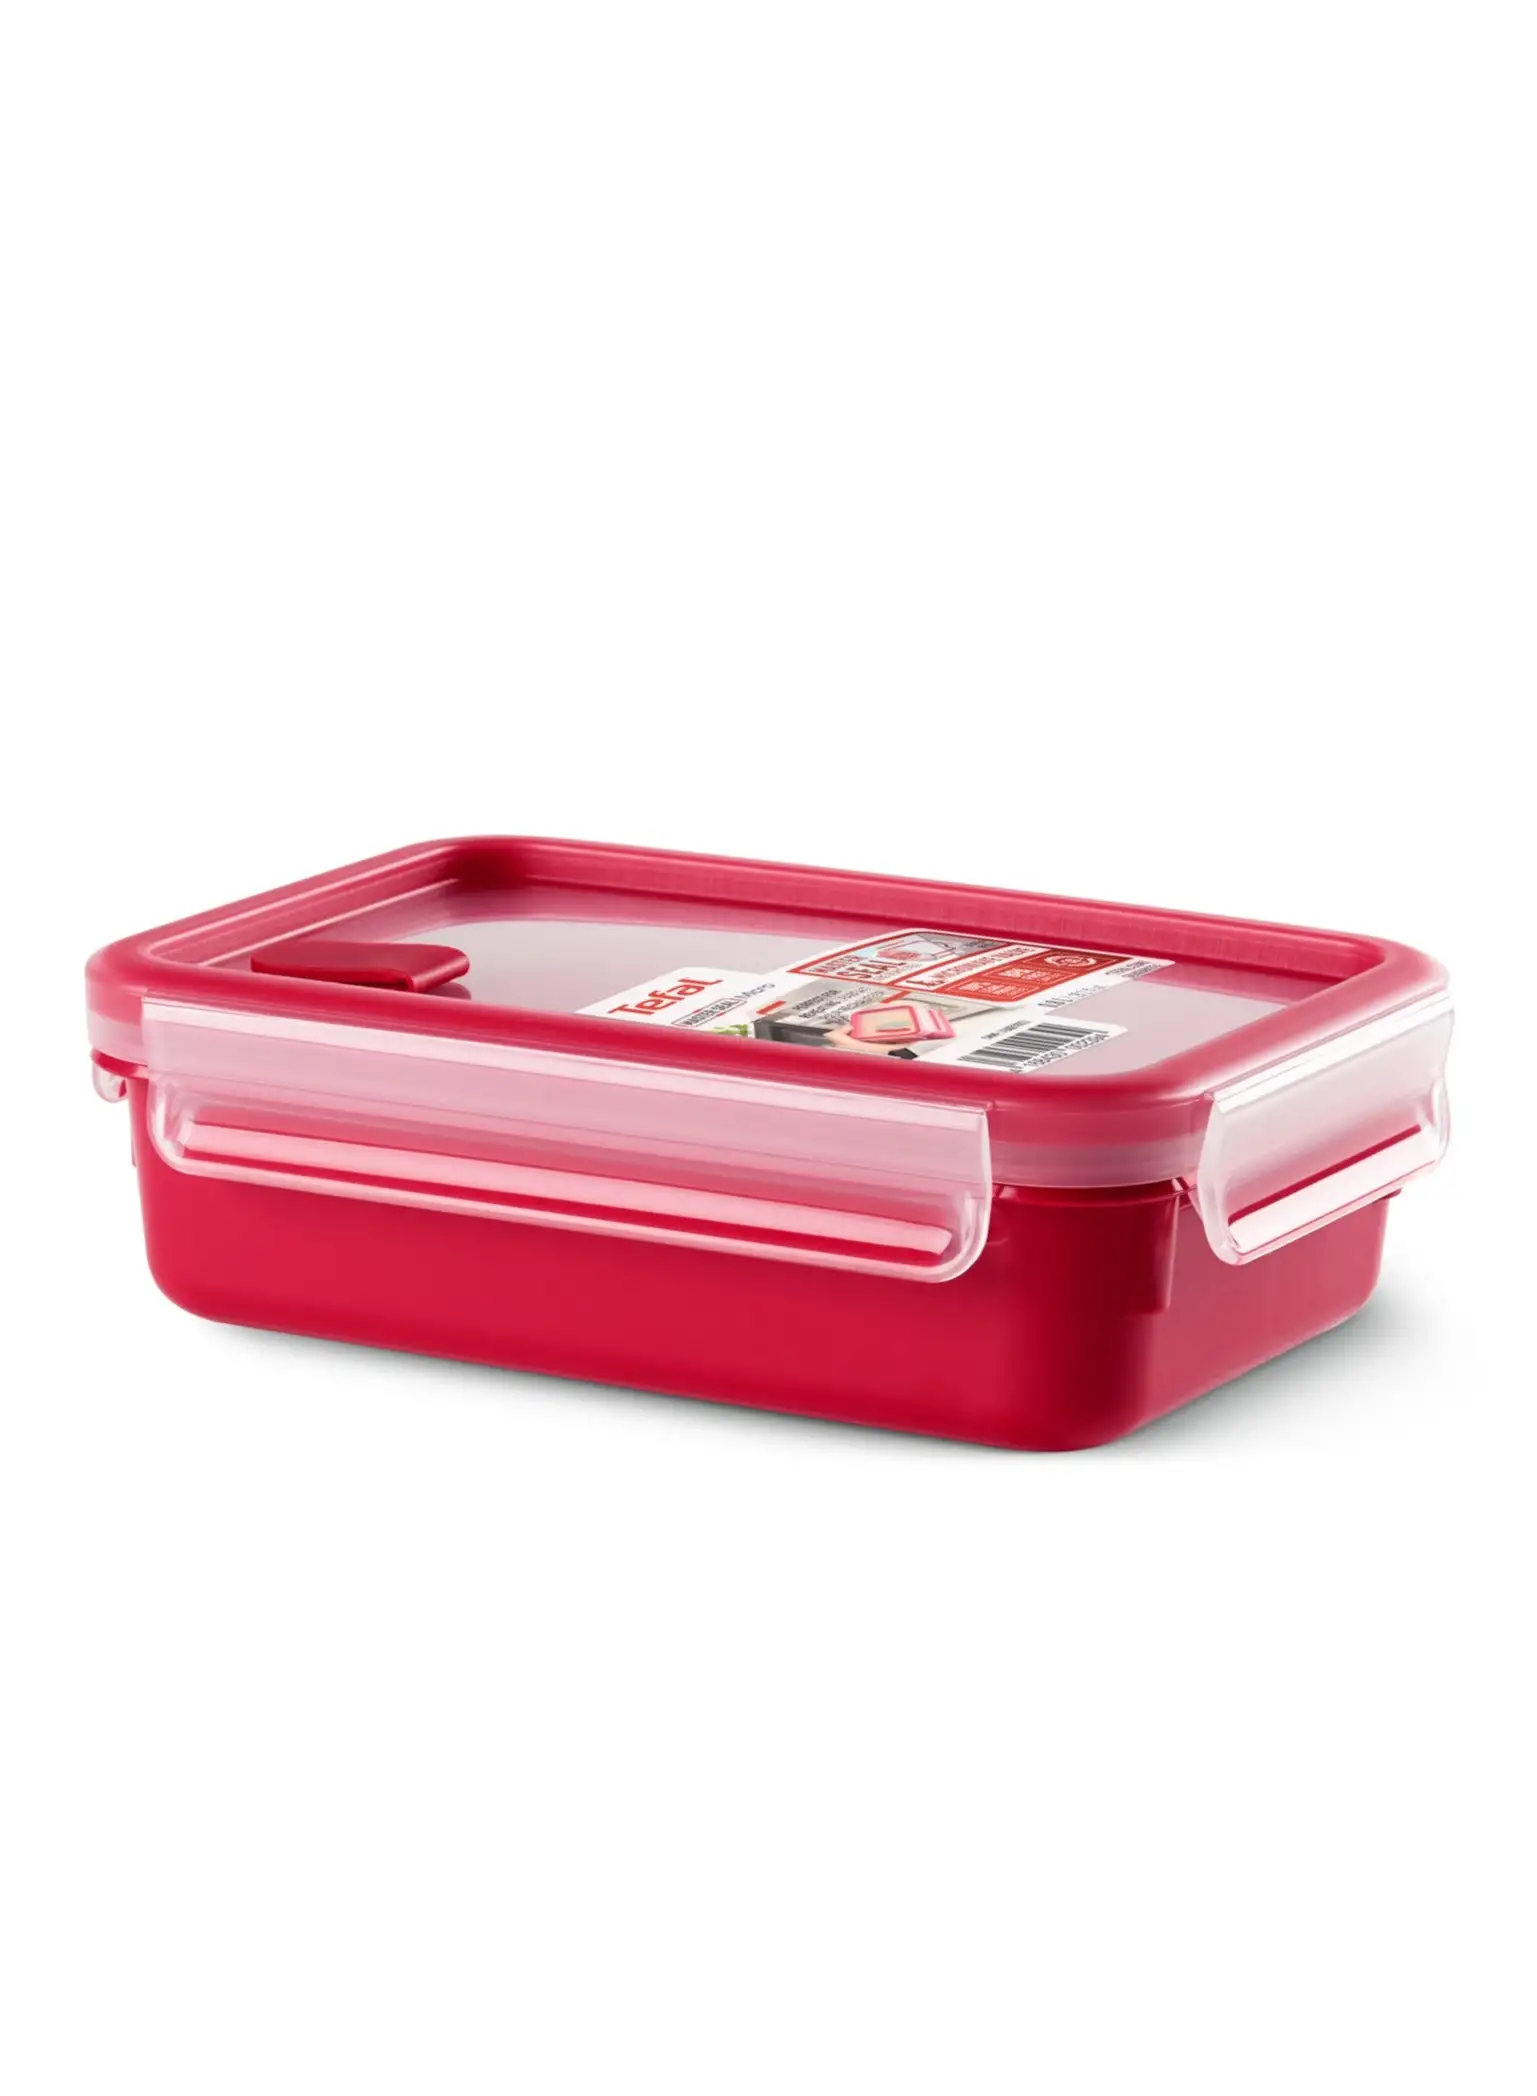 Tefal Master Seal Micro Rectangle Food Storage Red/Clear 0.8 Litre